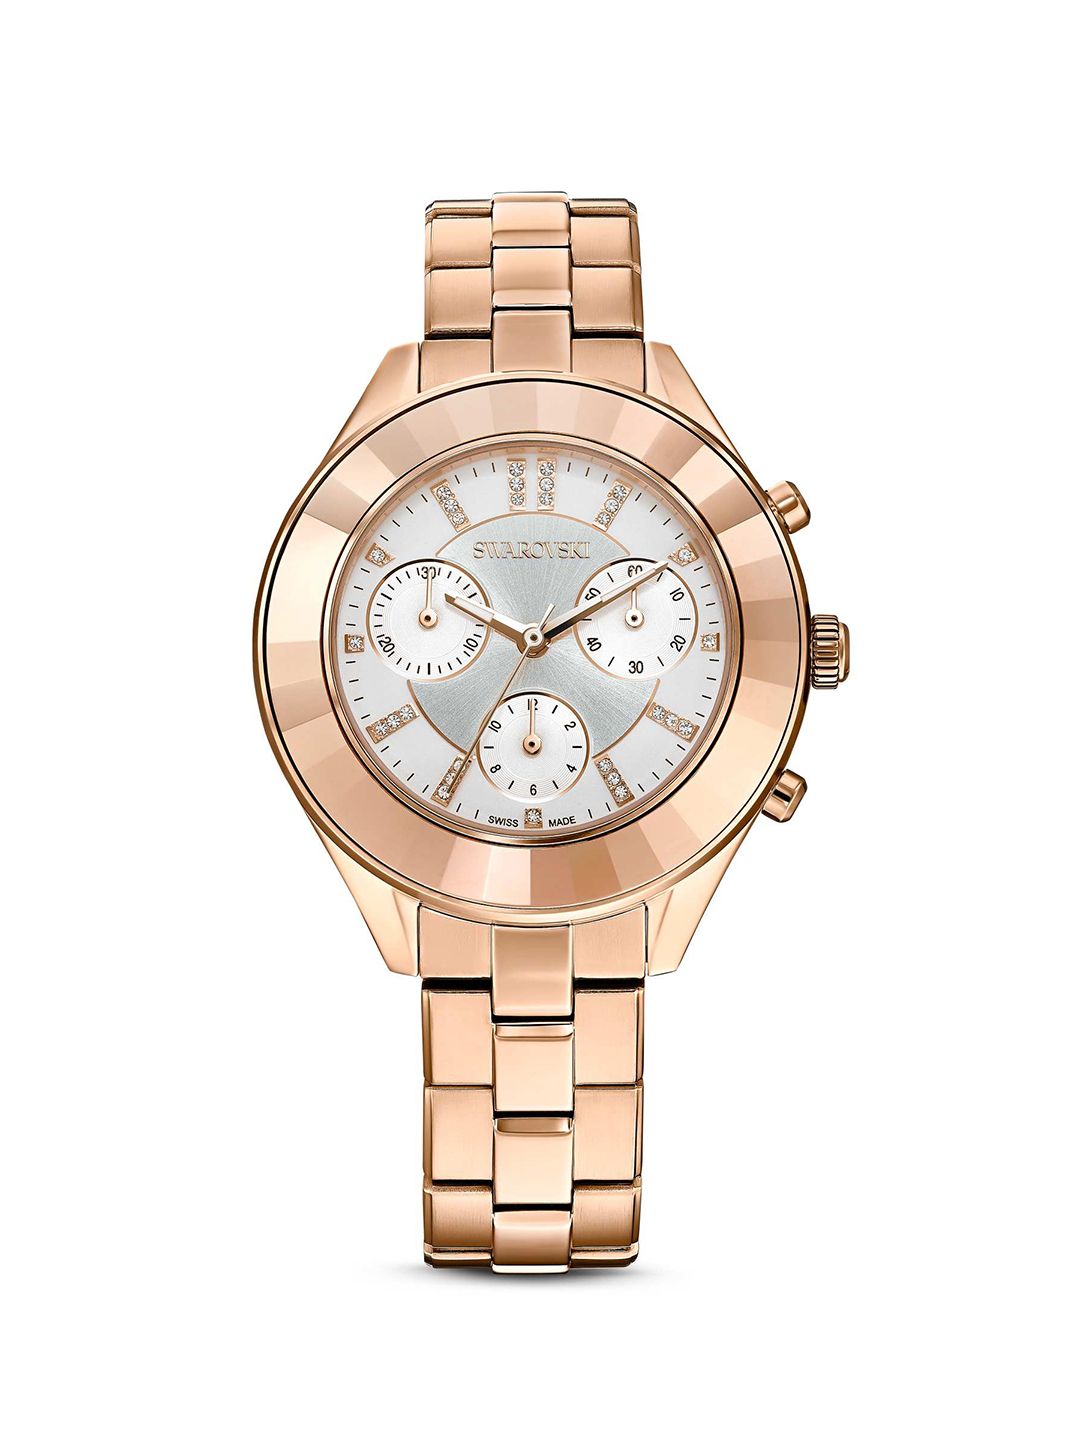 SWAROVSKI Women Rose Gold-Toned Analogue Octea Lux Chronograph Automatic Watch 5612194 Price in India